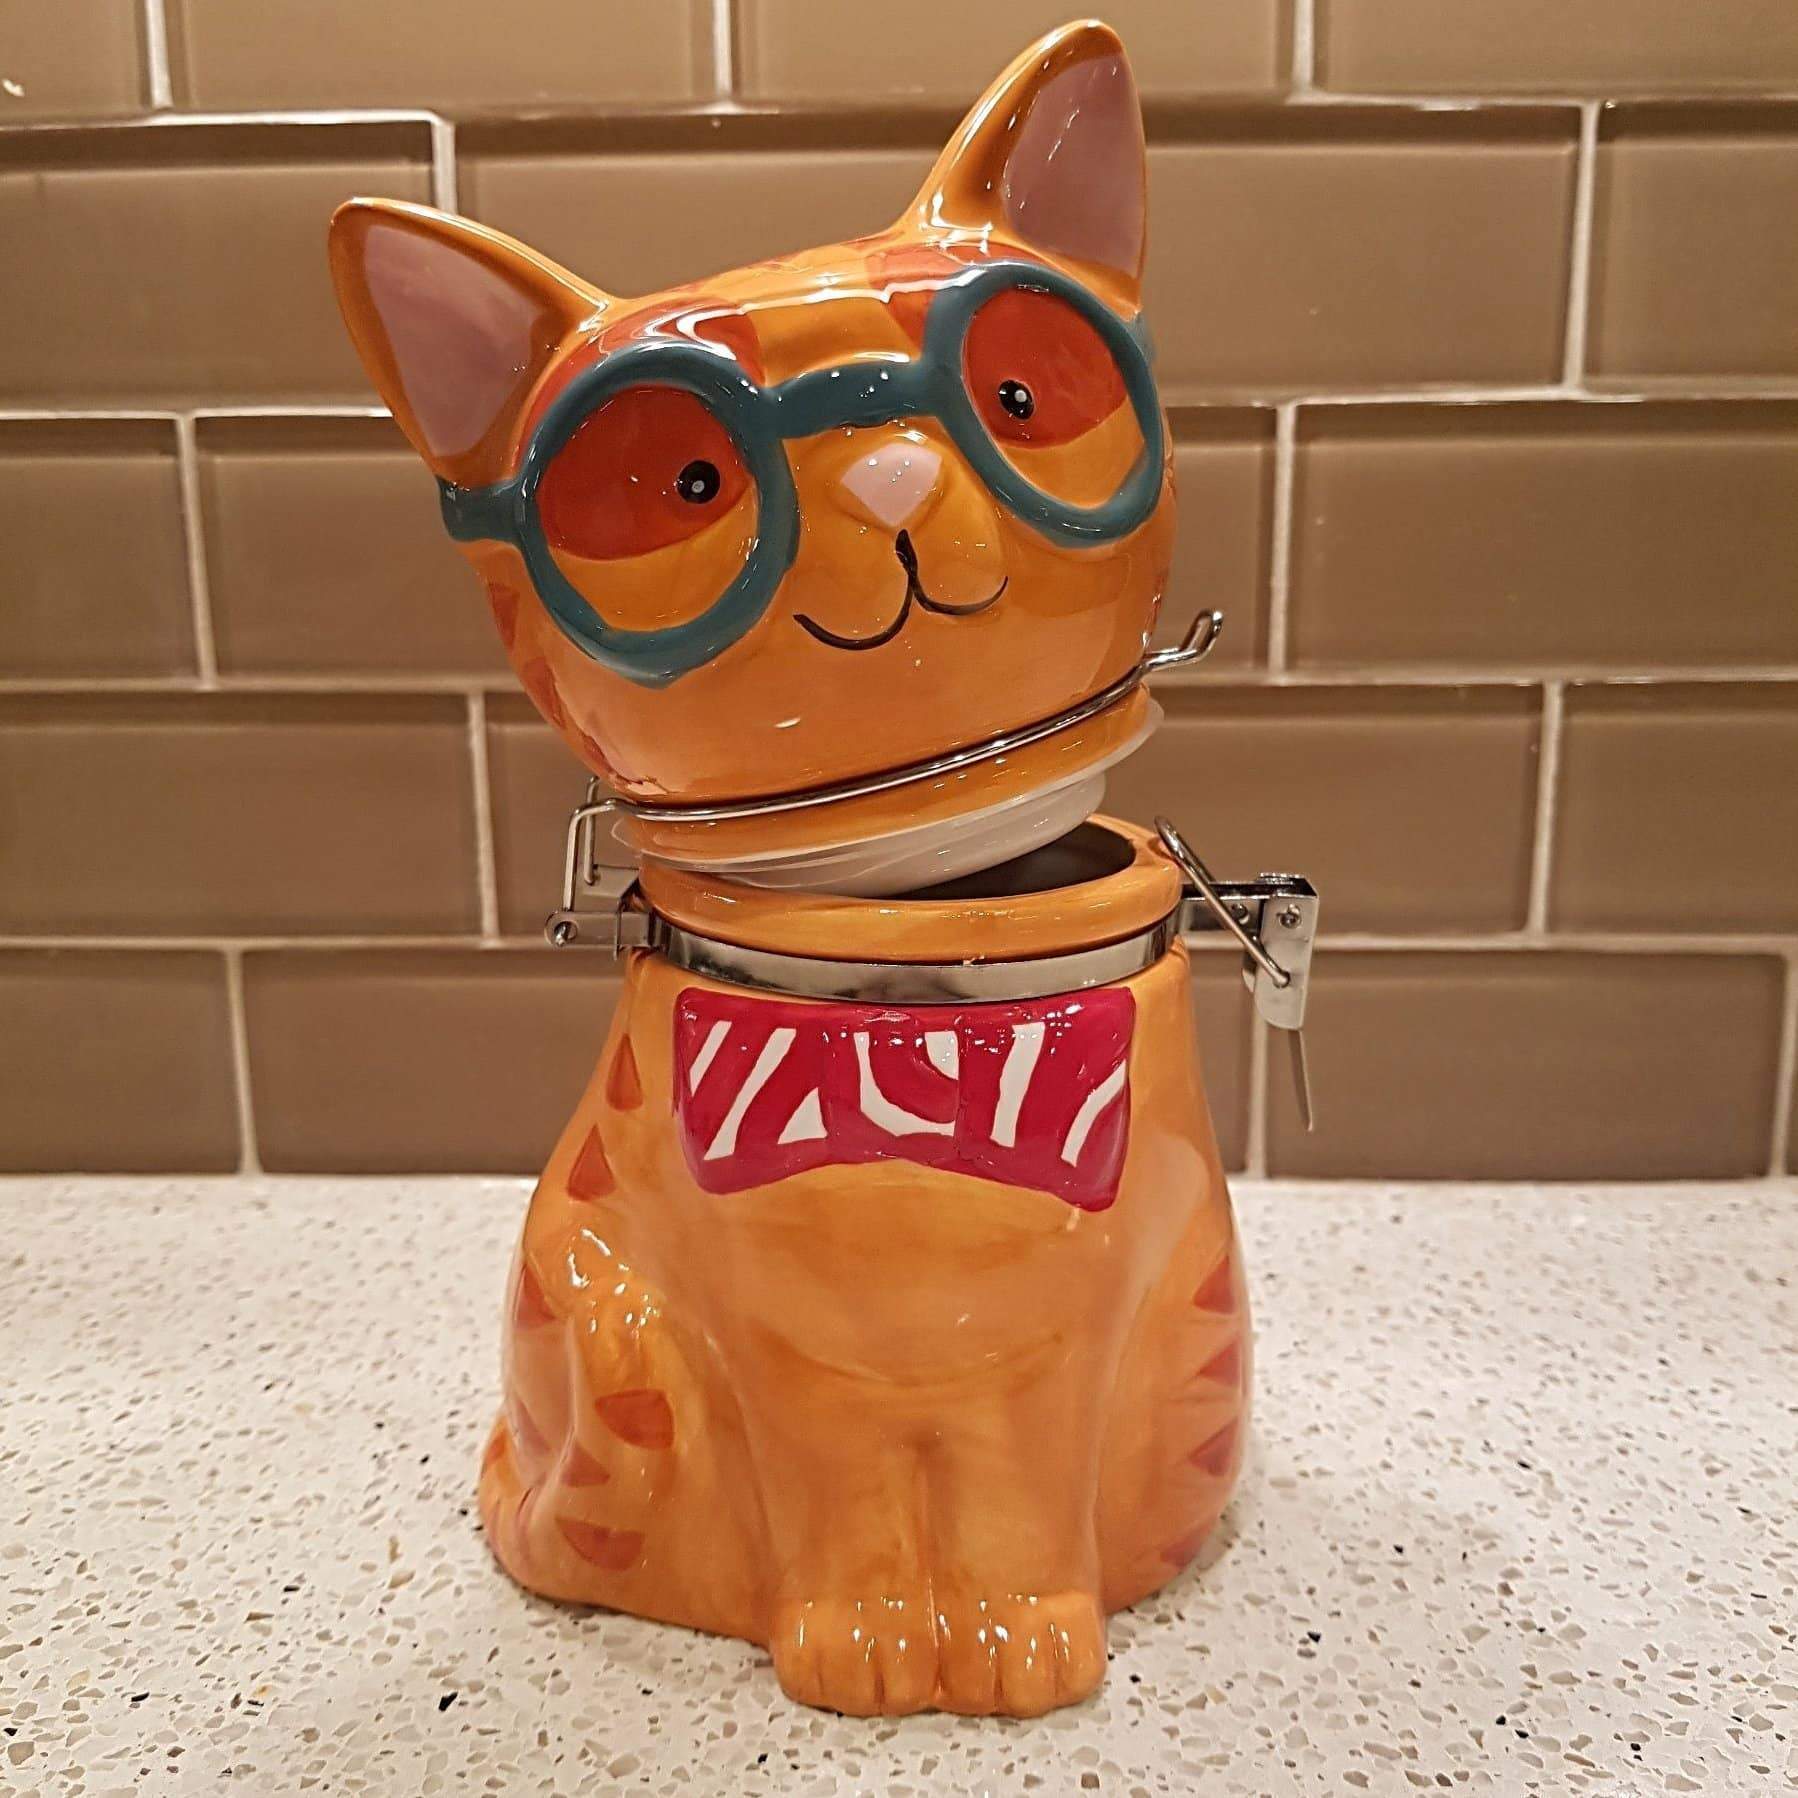 Cat Kitchen Decor, Cat Shaped Jar for Treats and Cookies